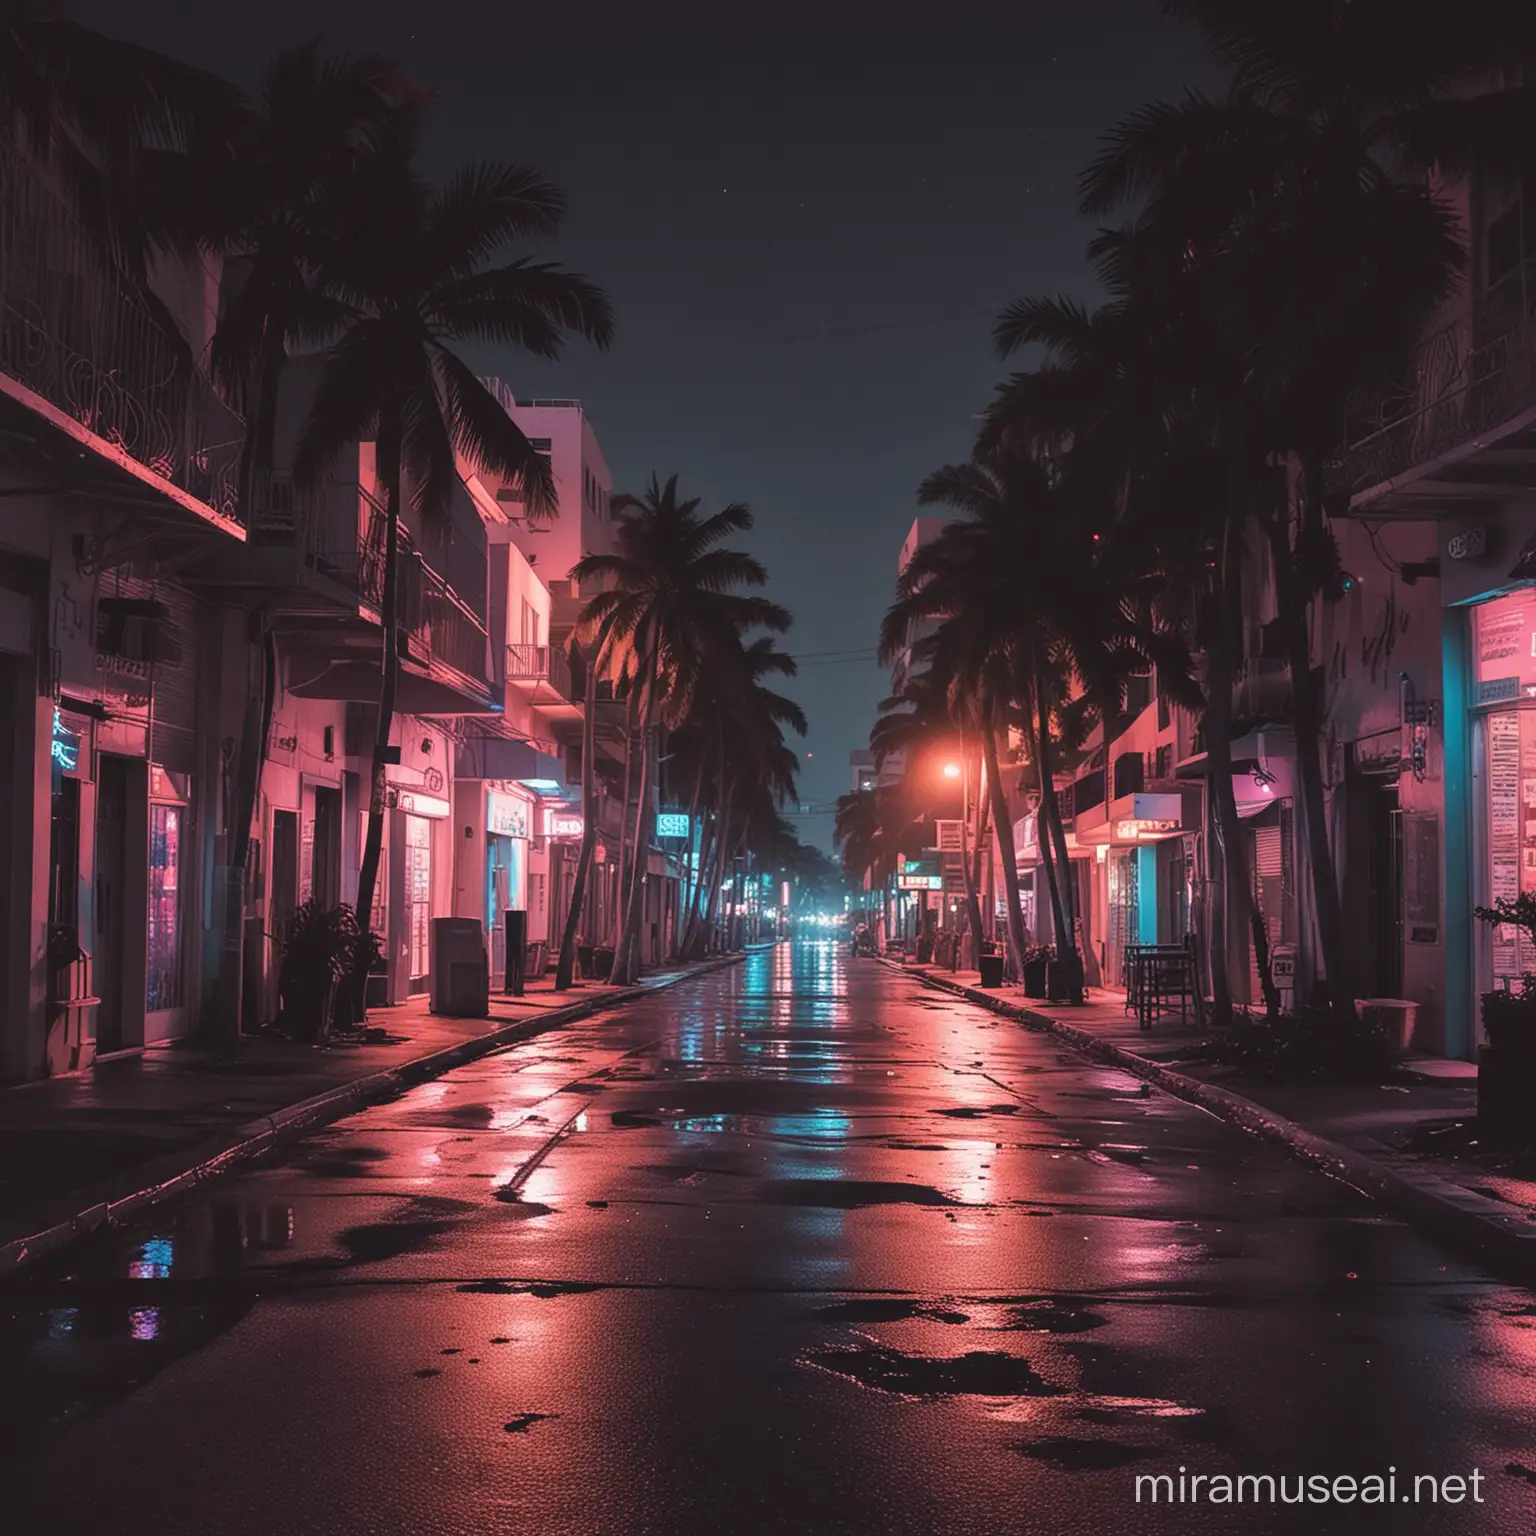 Mysterious Miami Enclave Secrets of NeonLit Darkness Revealed